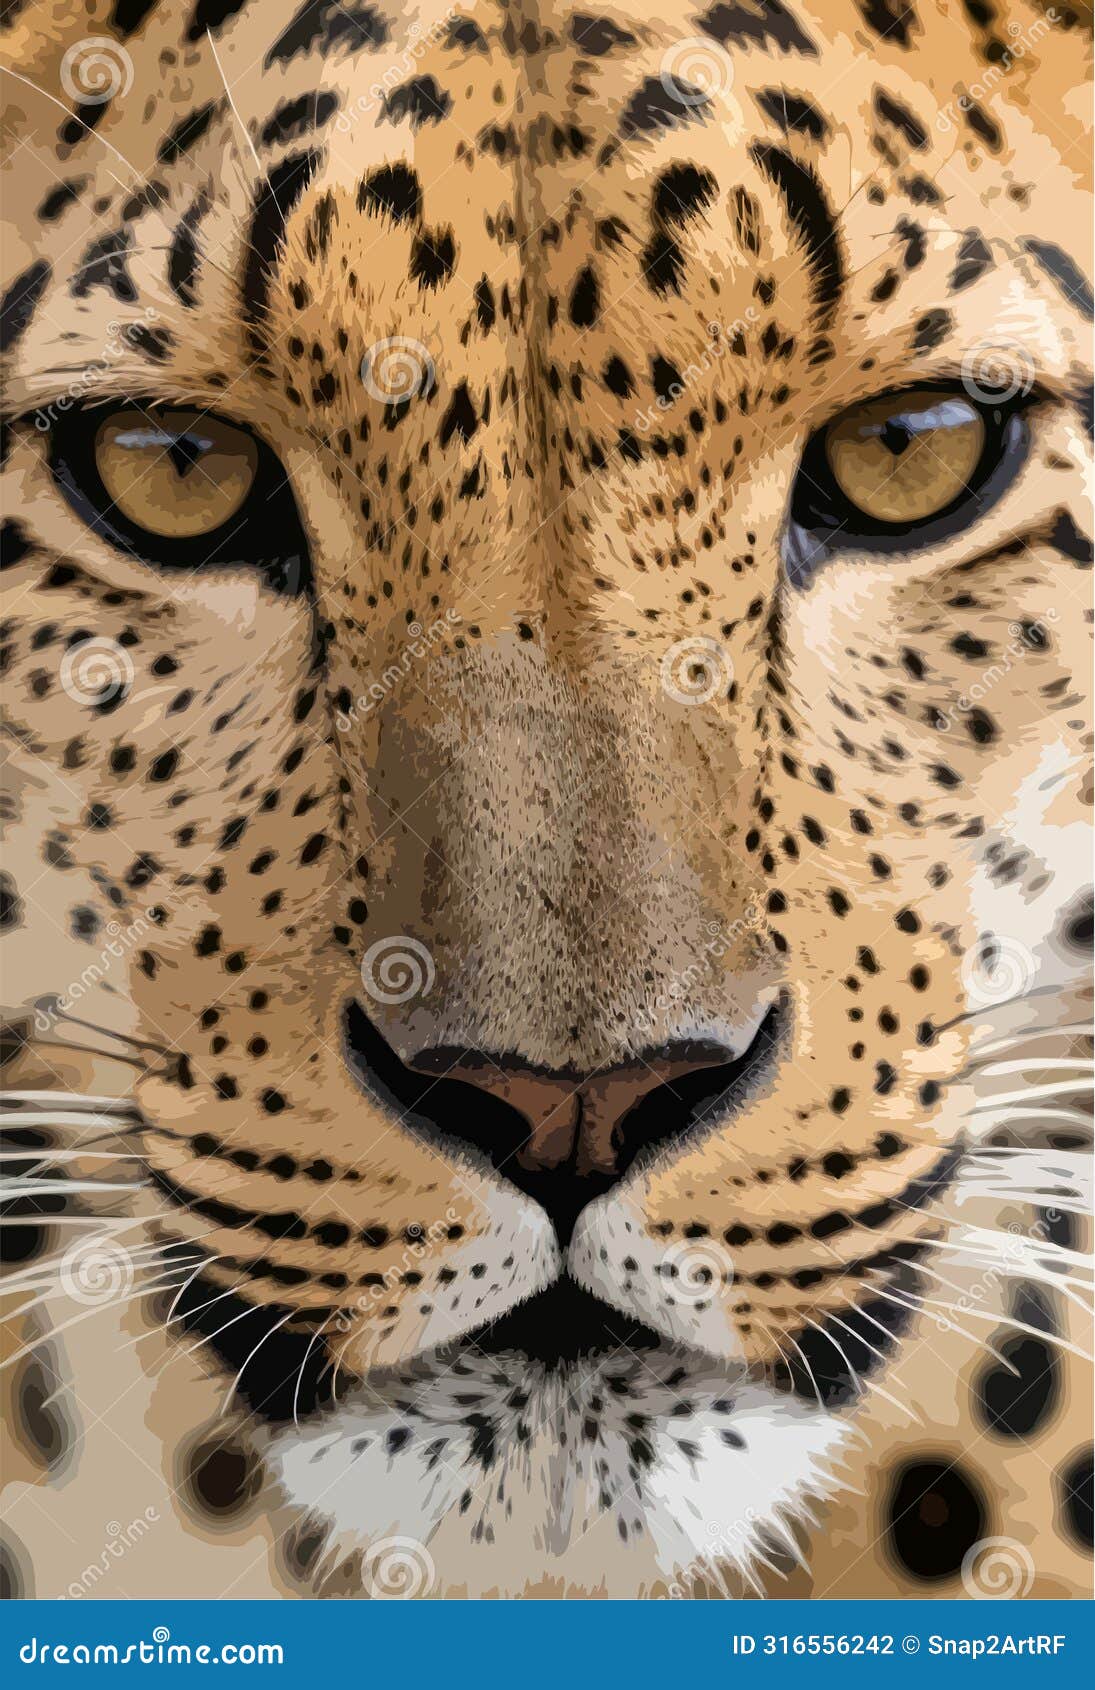 high detailed full color  - captivating wild carnivore close-up  of intense piercing stare of leopard looking at